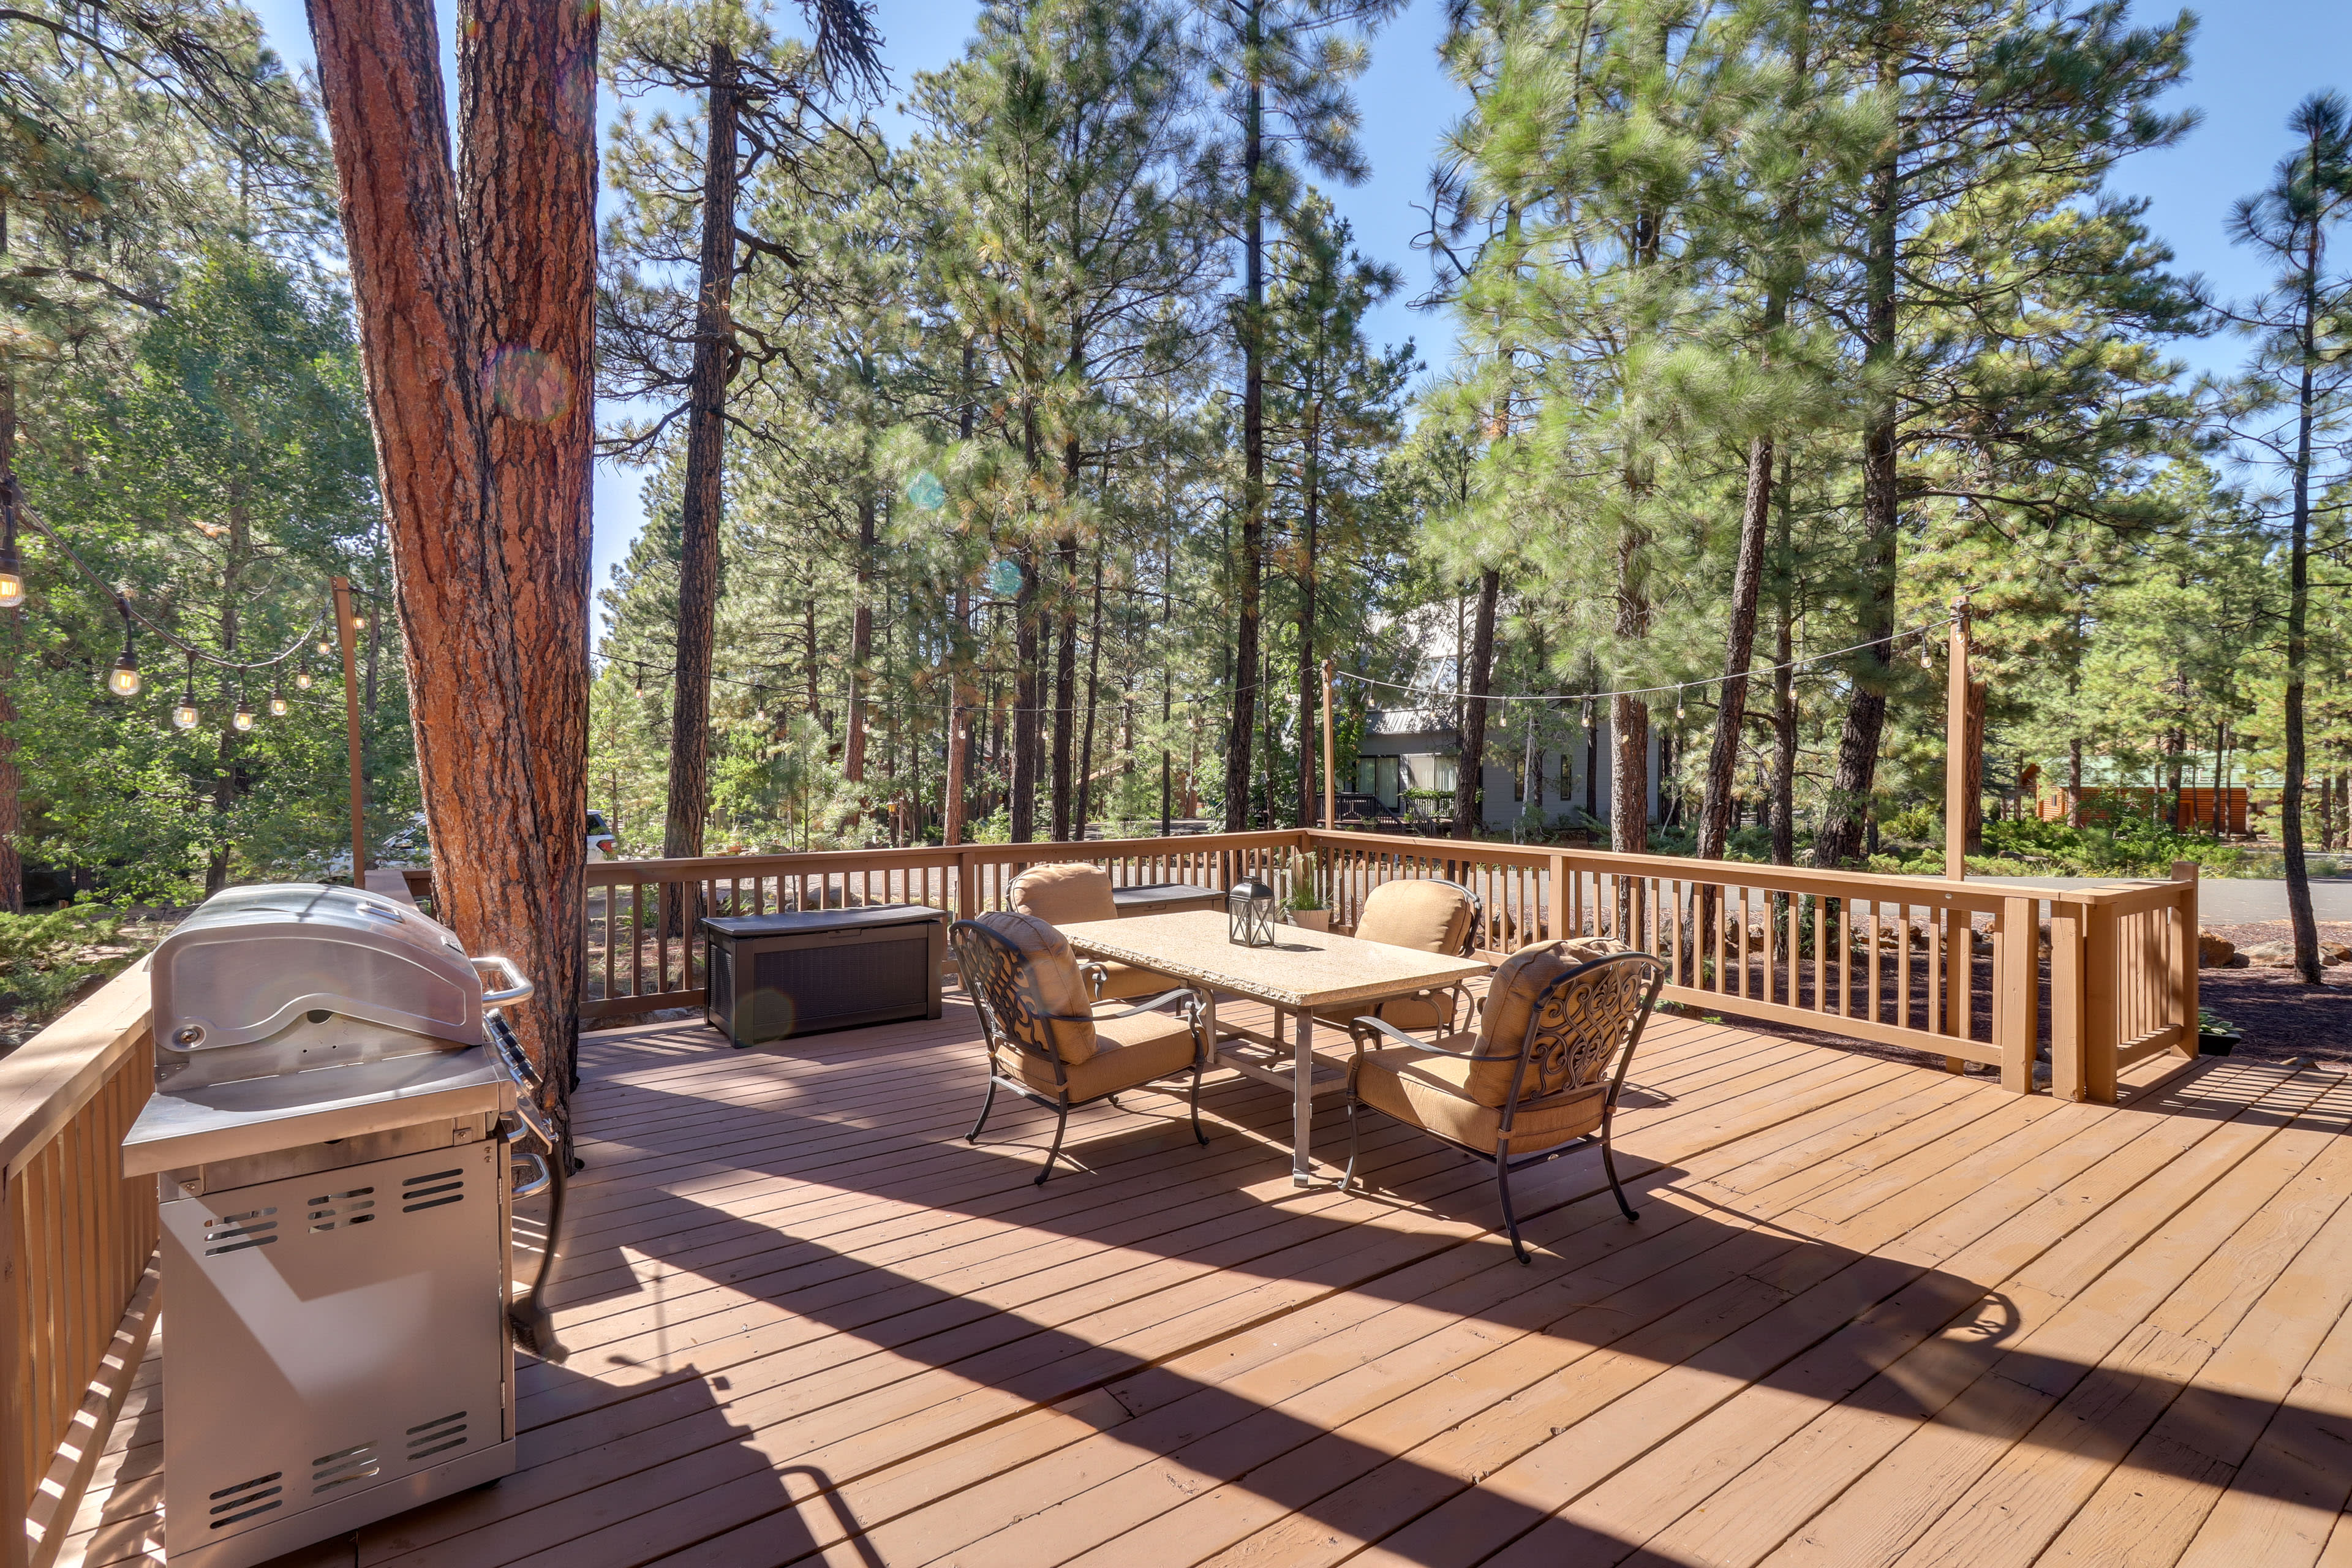 Wraparound Deck | Outdoor Dining Area | Gas Grill